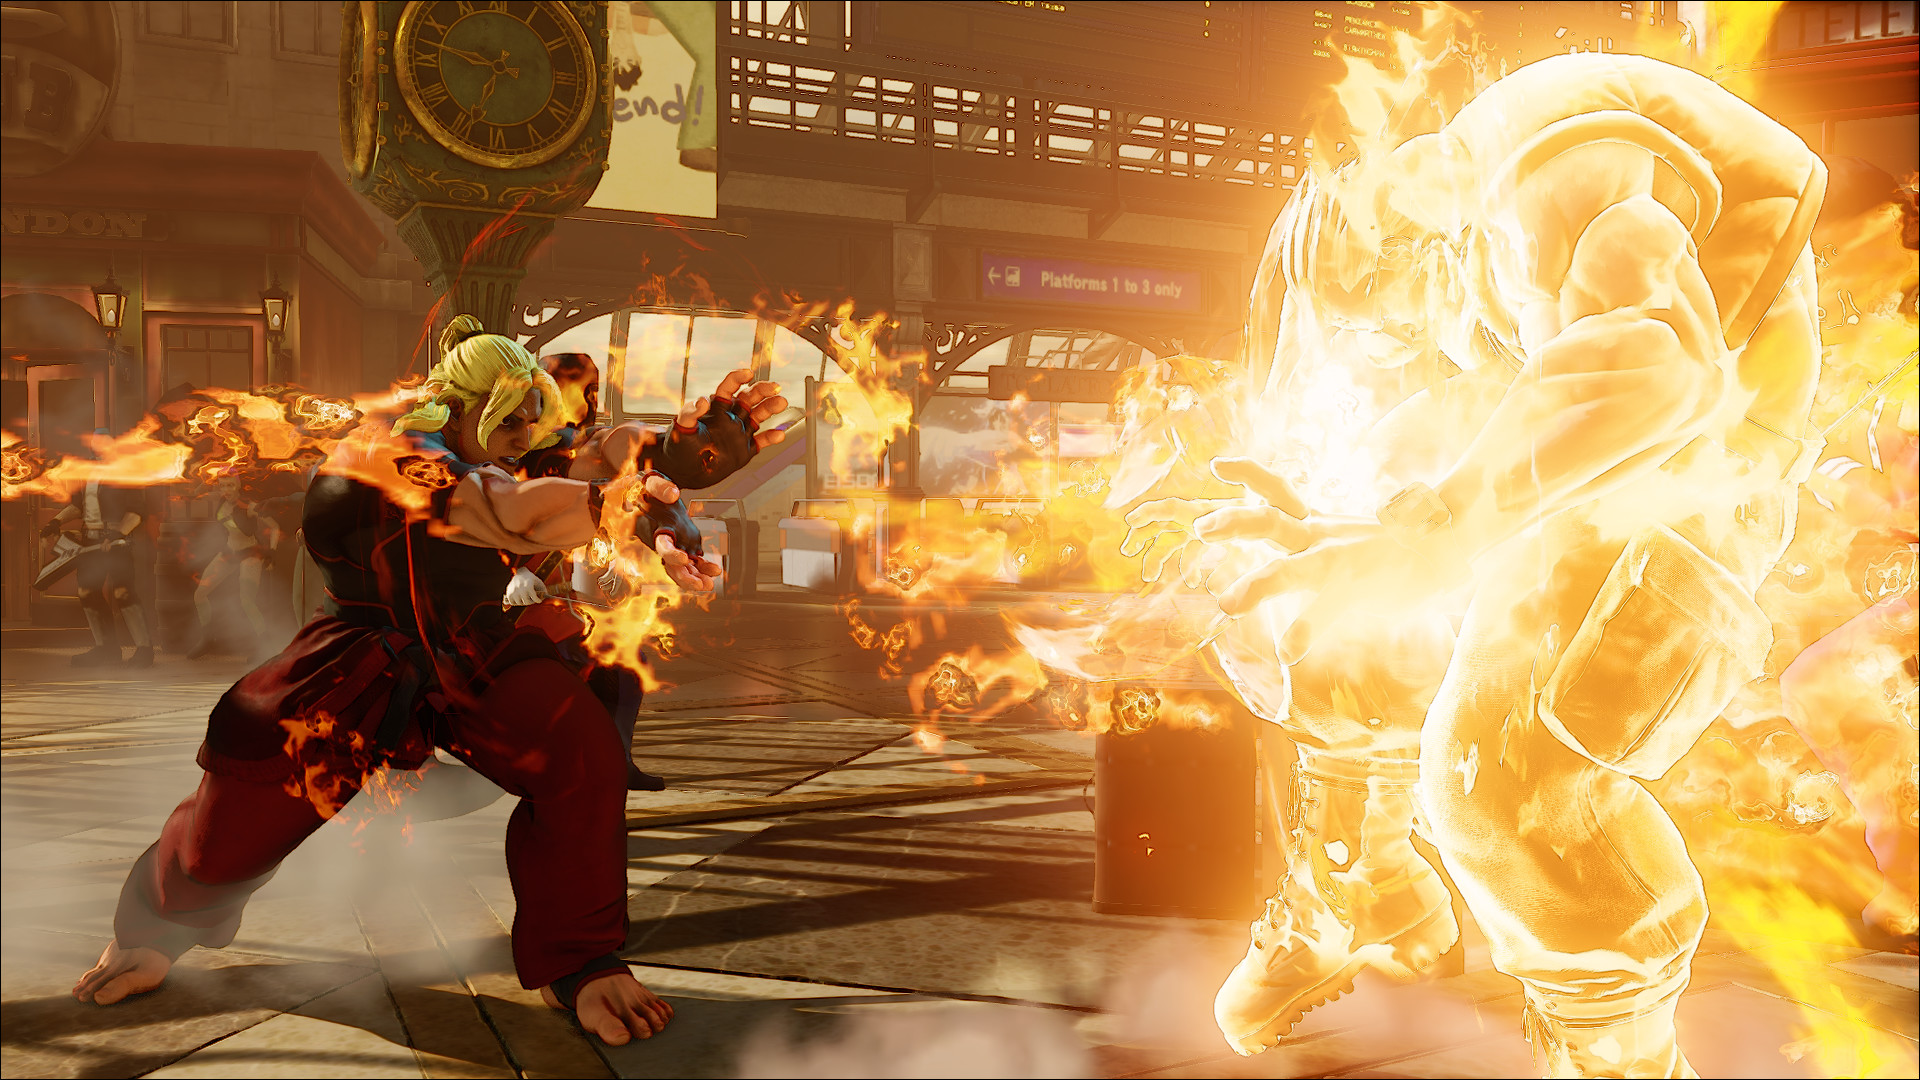 1920x1080 Street Fighter V will be exclusively for PS4 and PC and for more  information, visit http://www.streetfighter.com/